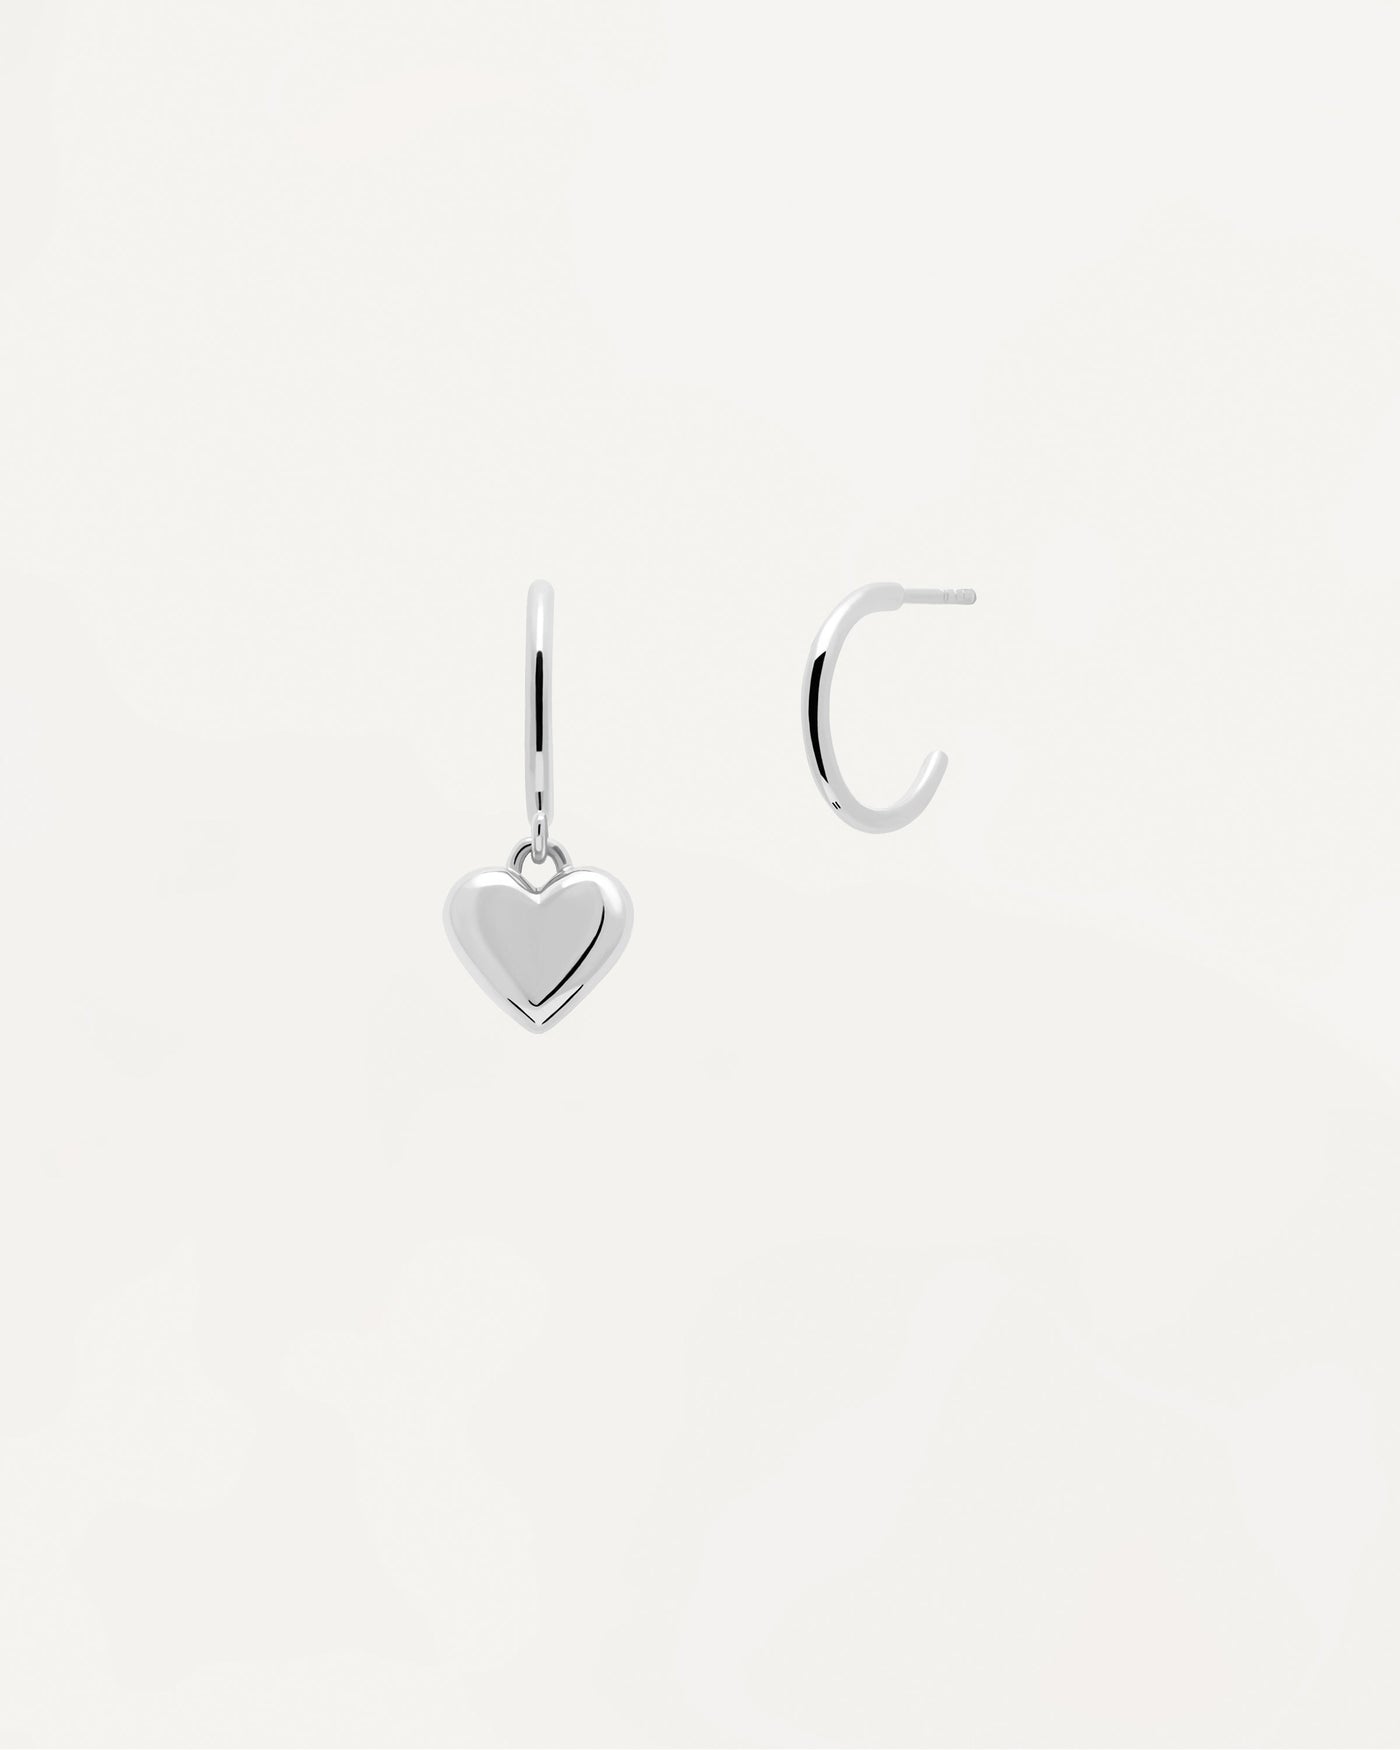 2023 Selection | L'Absolu Silver Earrings. Get the latest arrival from PDPAOLA. Place your order safely and get this Best Seller. Free Shipping over 40€